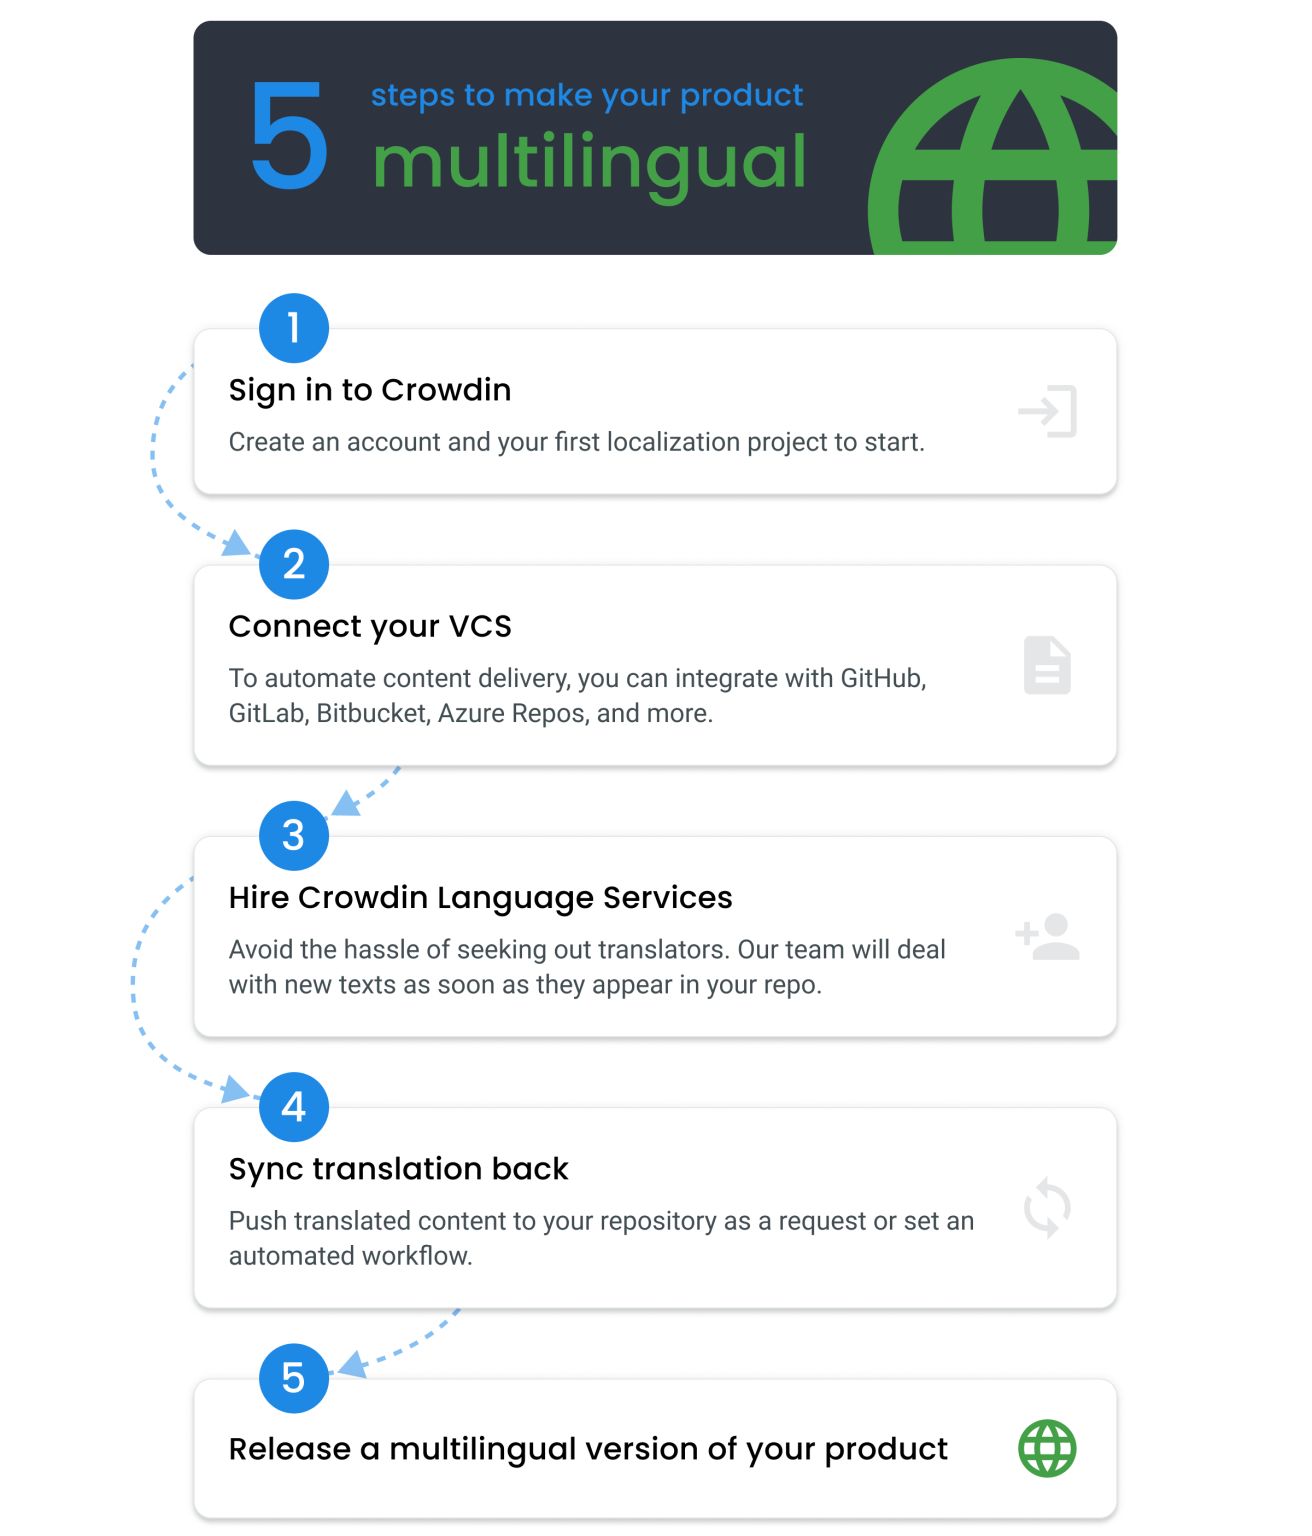 5 steps to make your product multilingual with Crowdin